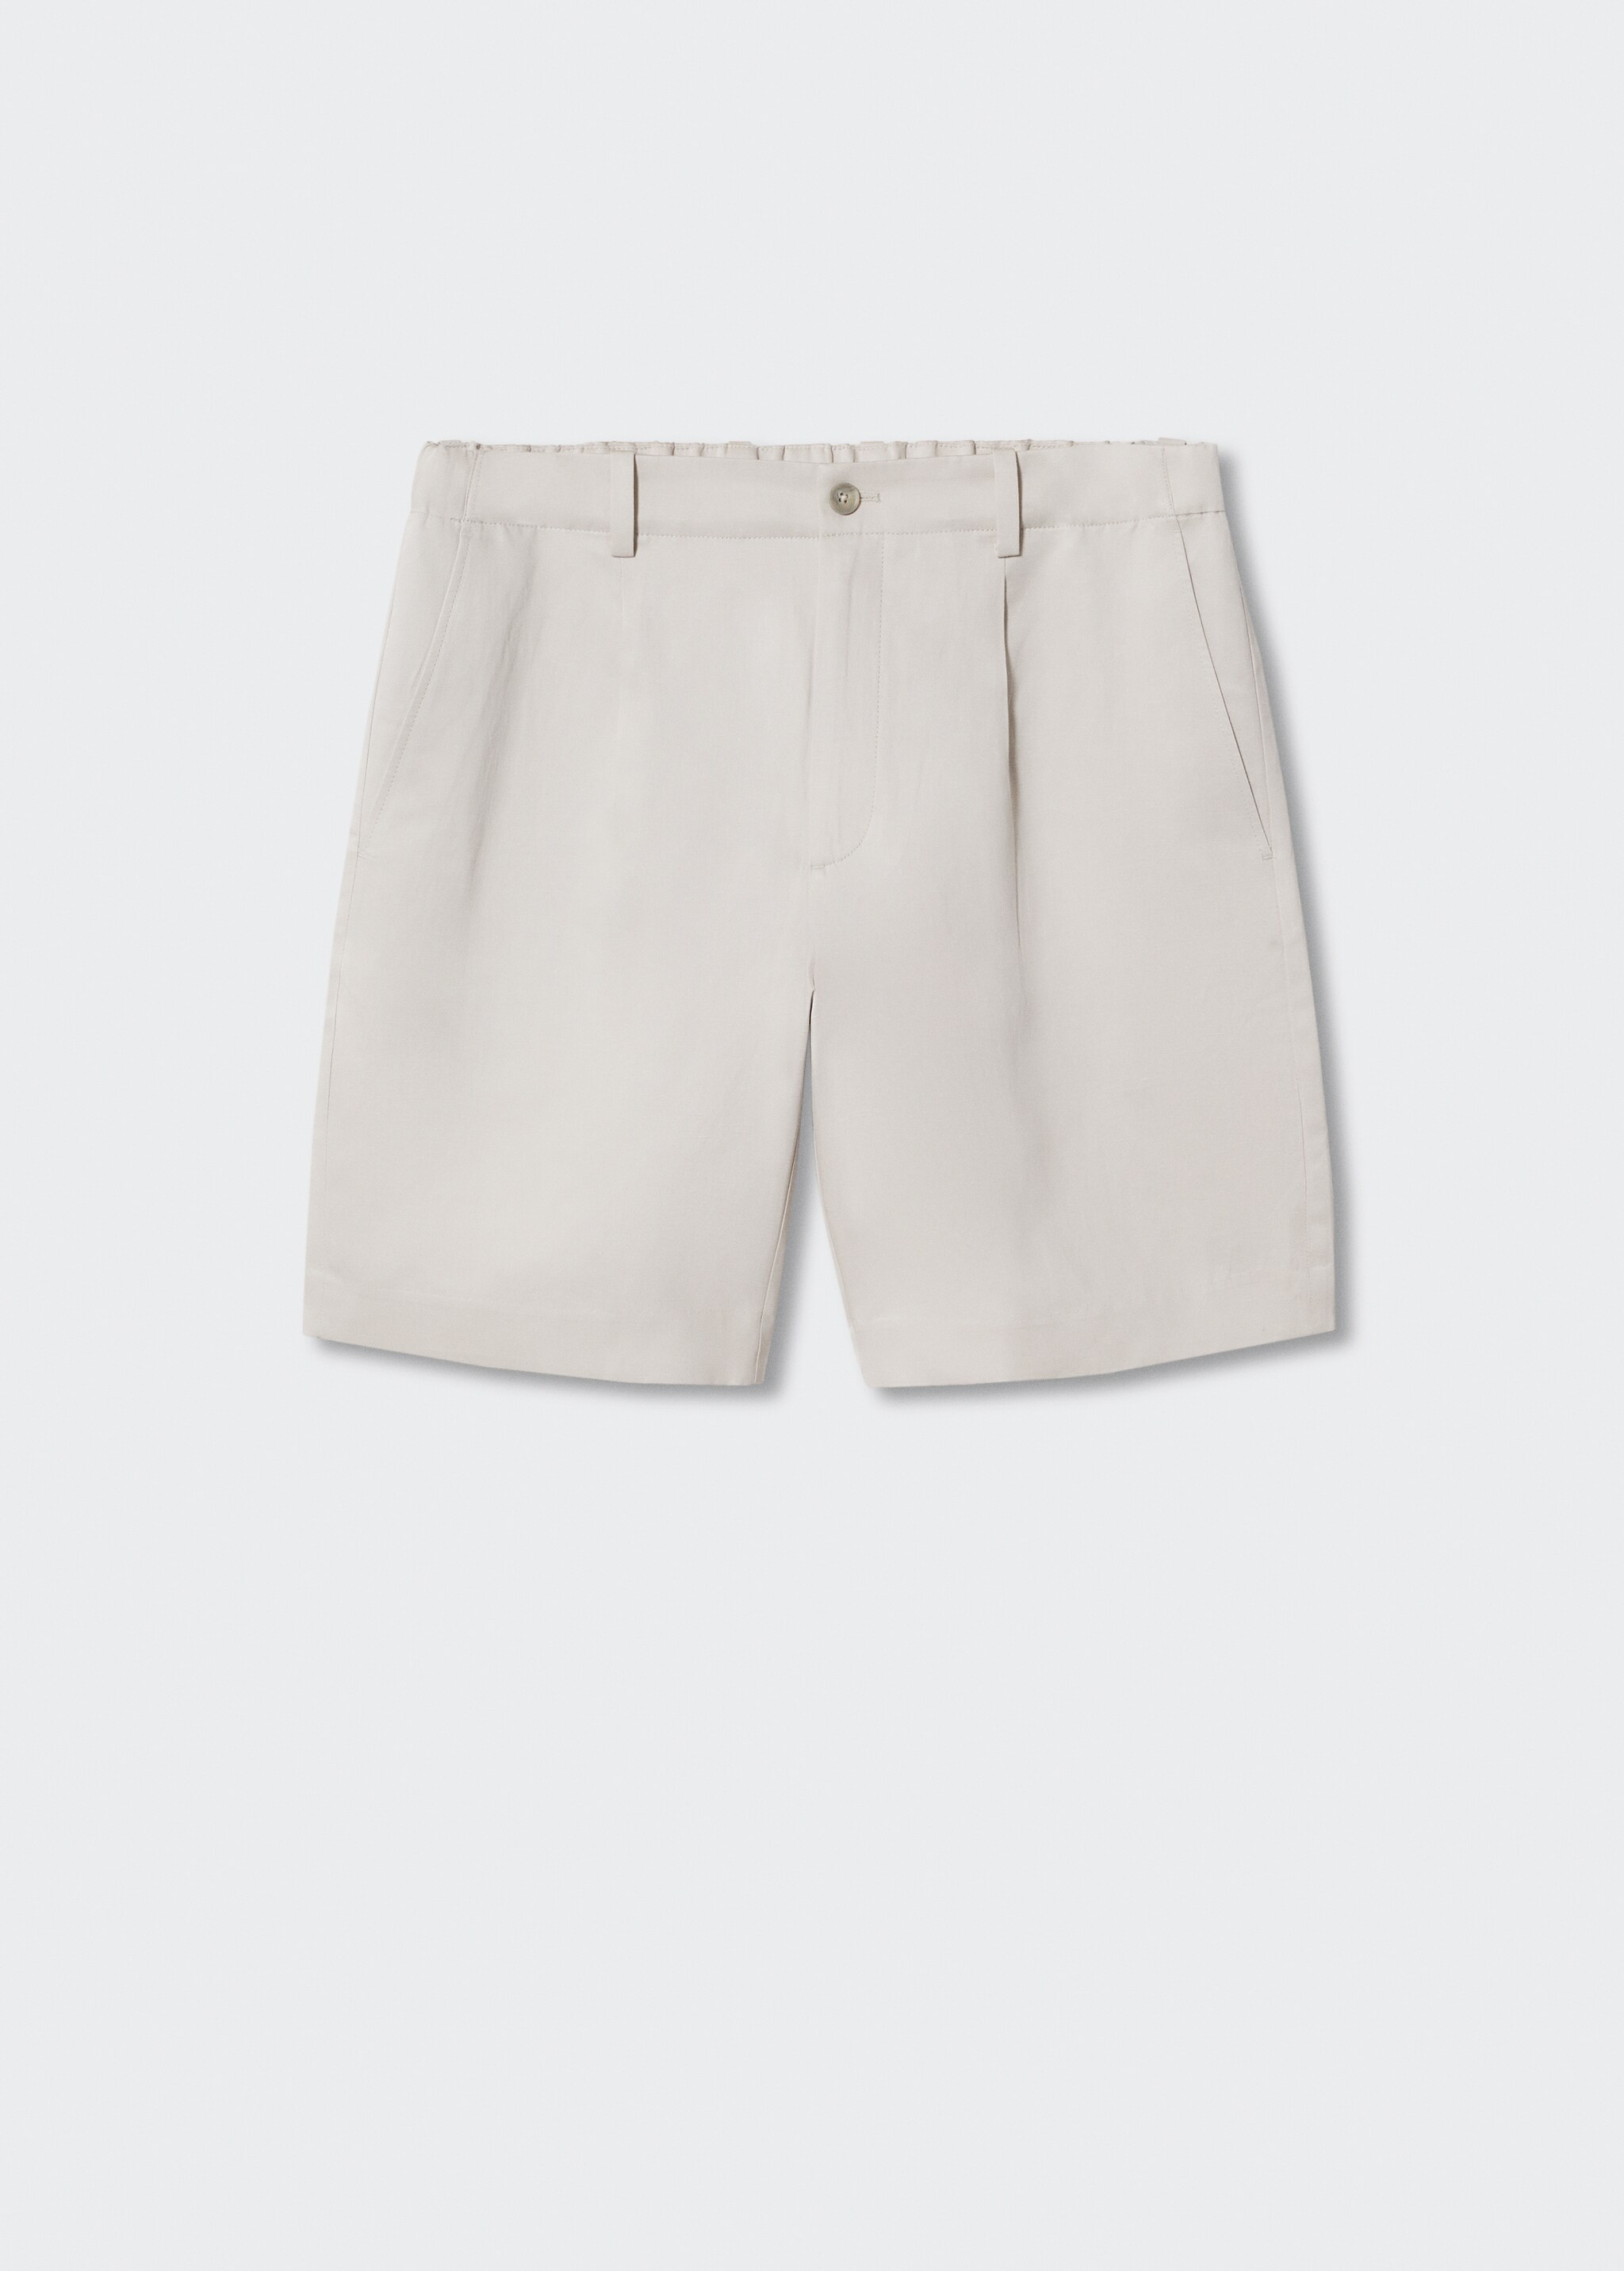 Linen lyocell Bermuda shorts - Article without model